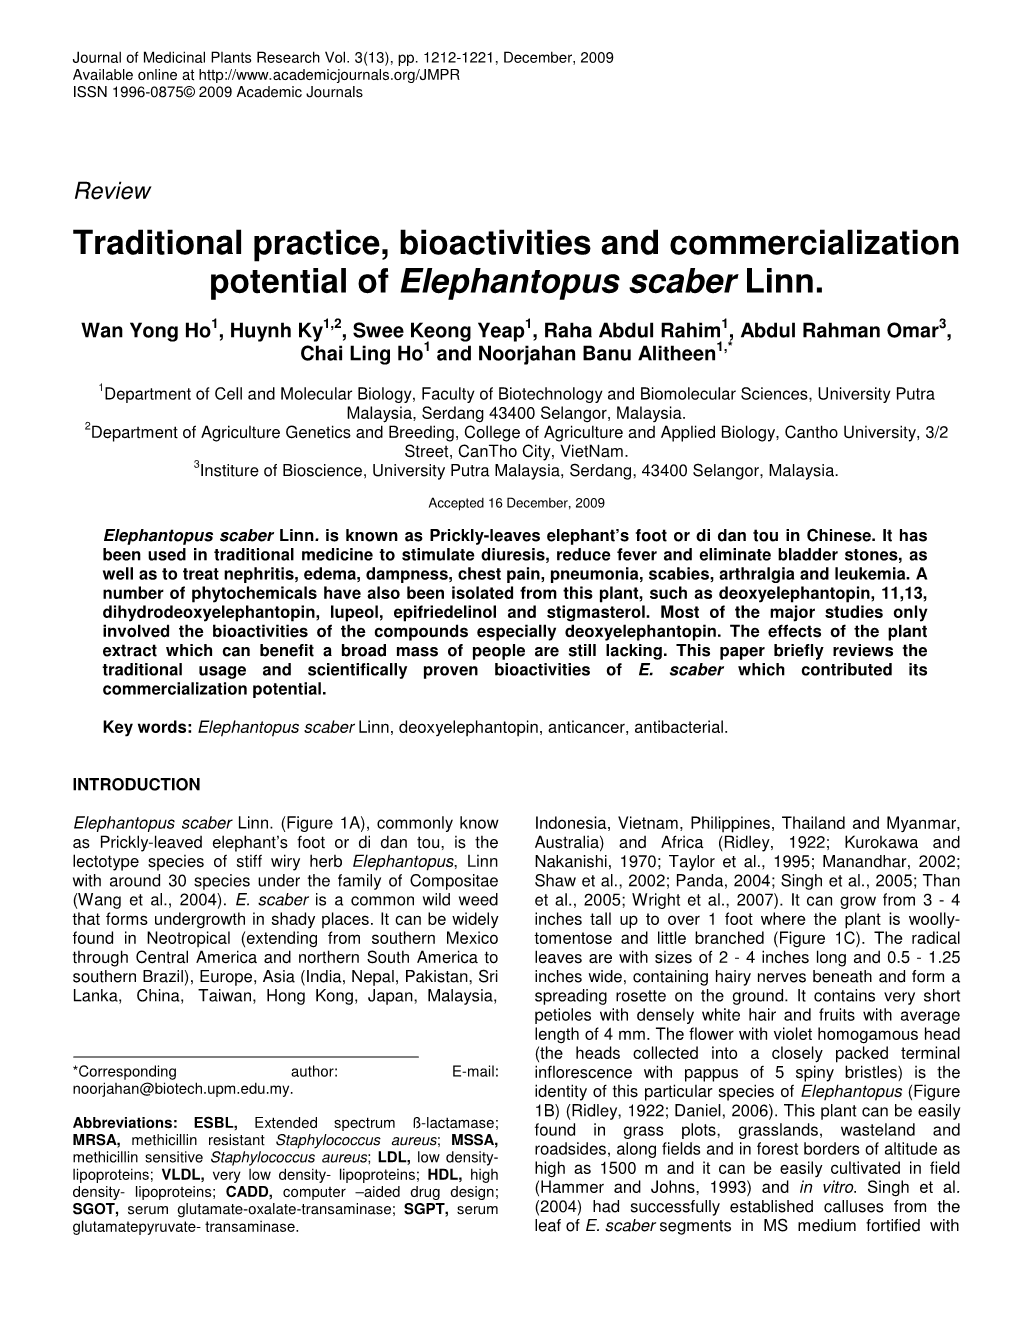 Traditional Practice, Bioactivities and Commercialization.Pdf